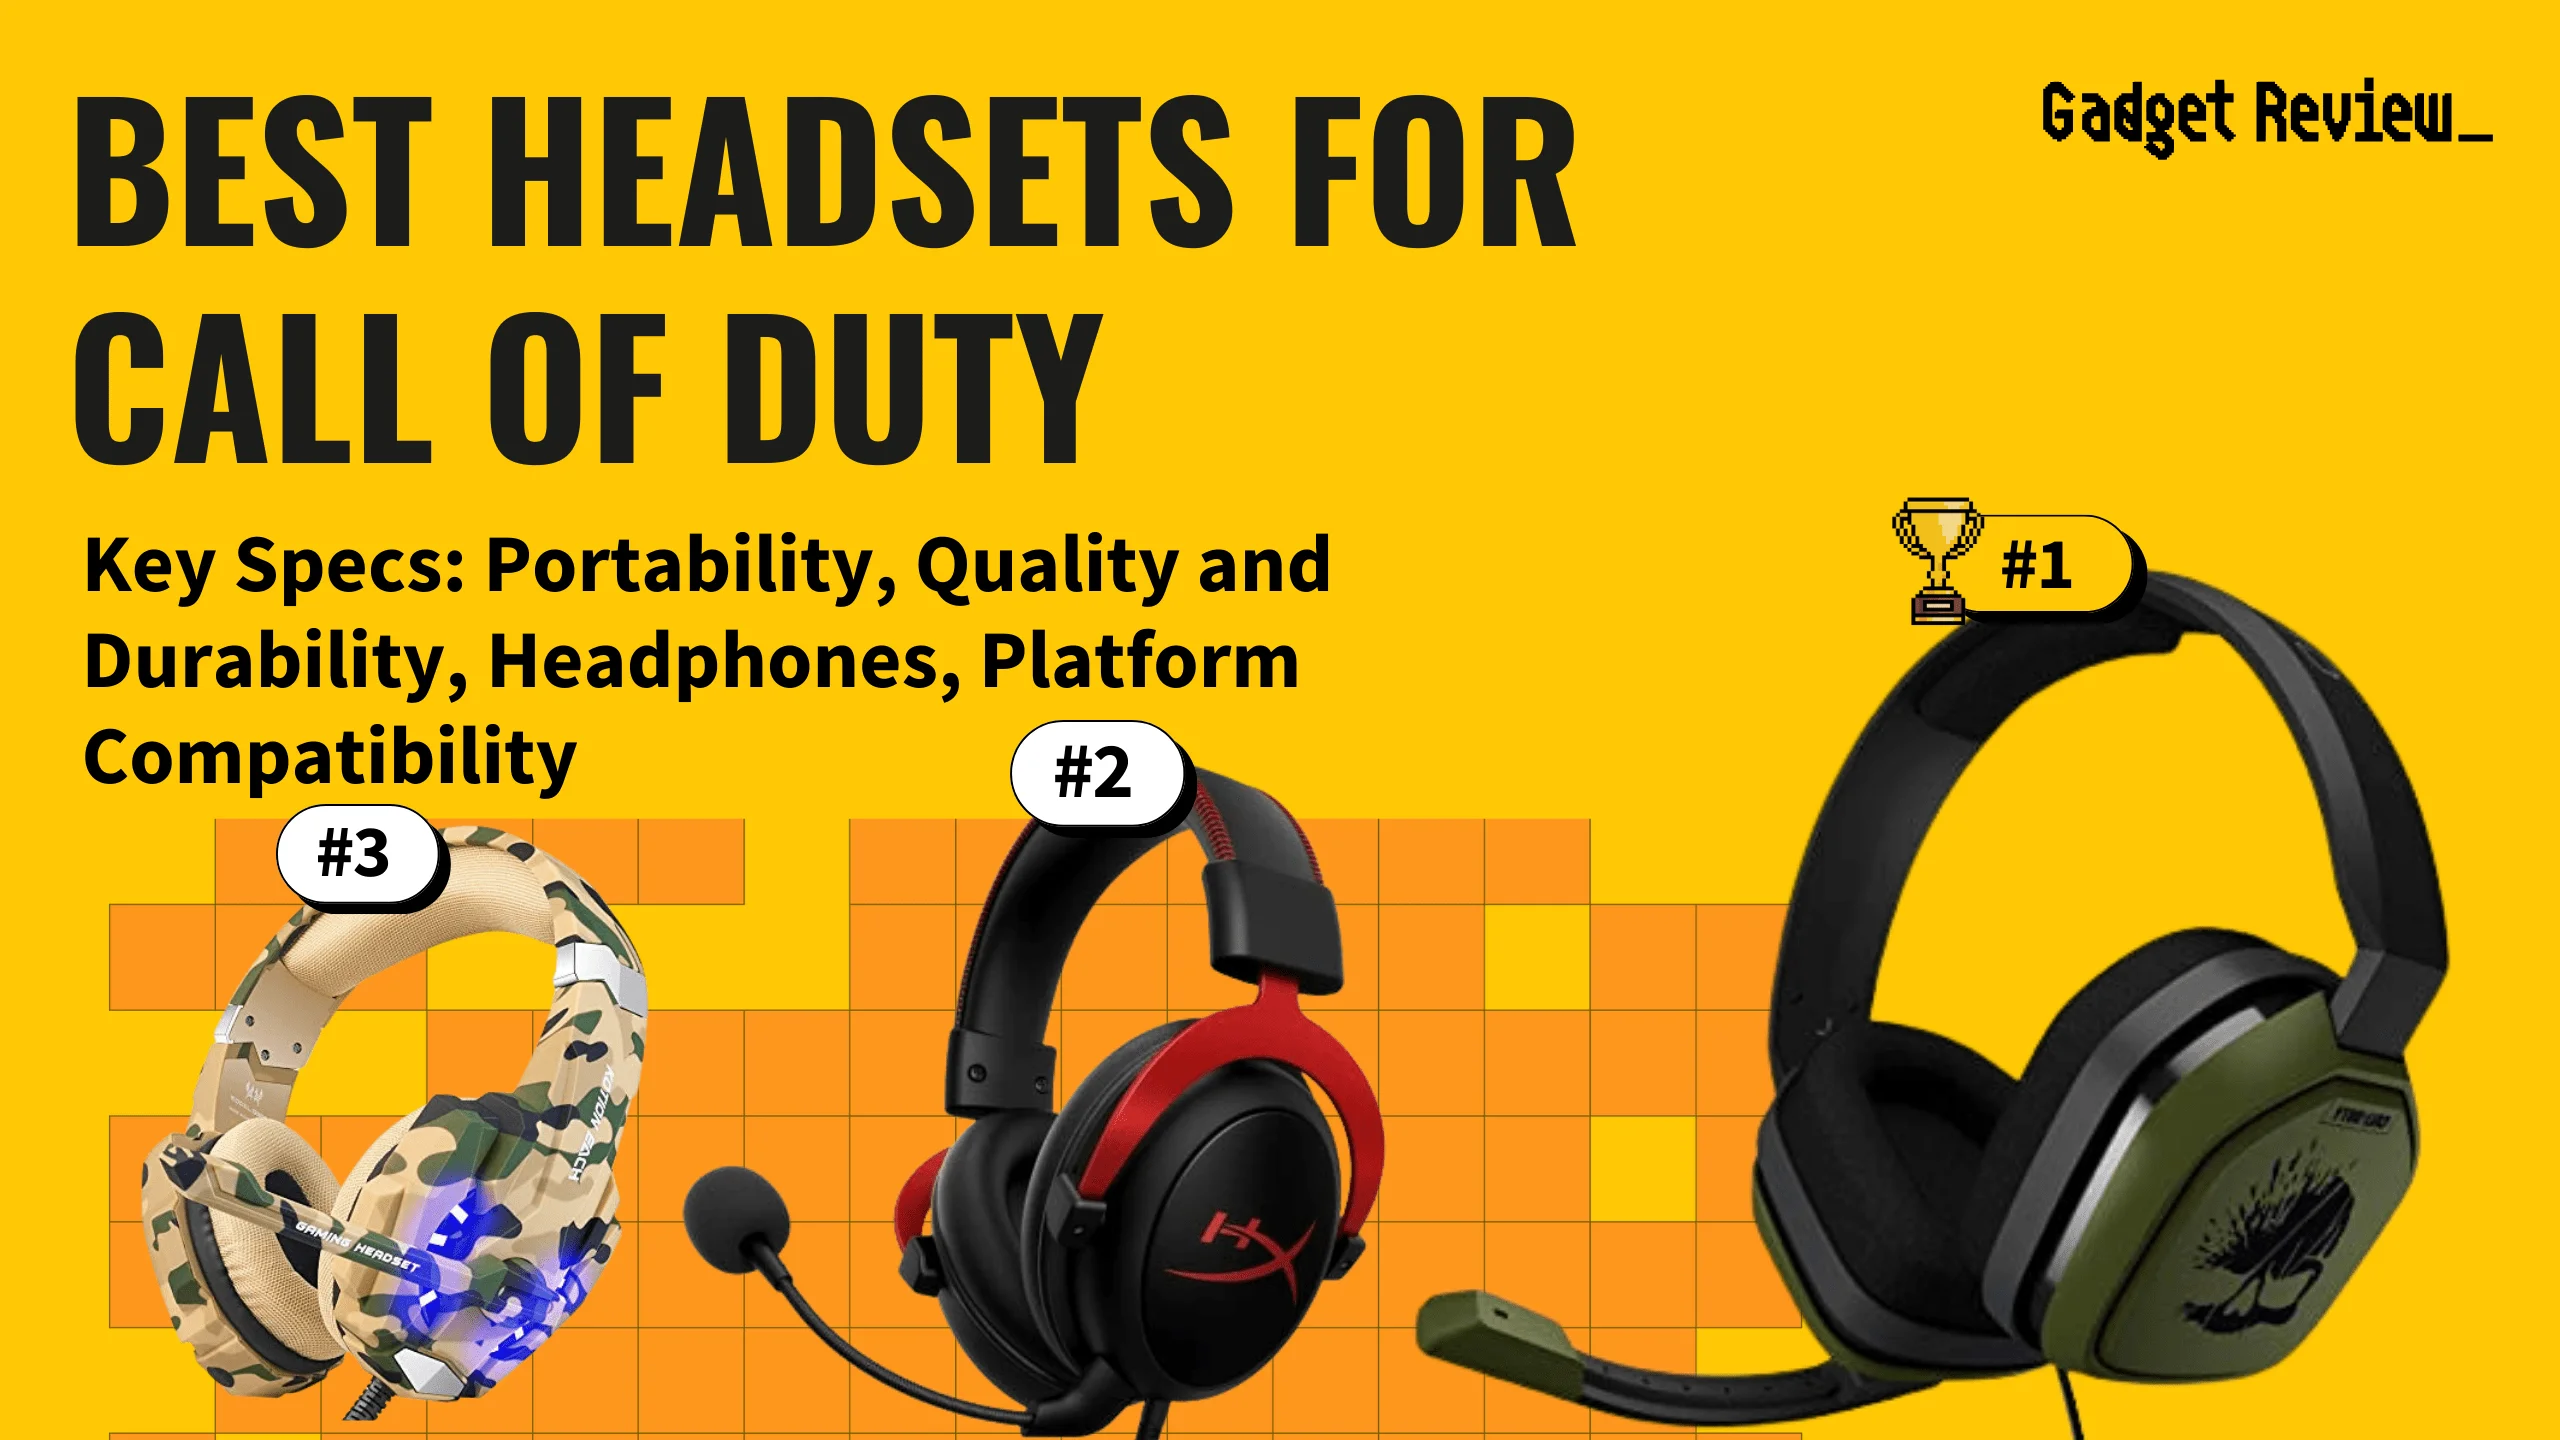 Best Headsets for Call of Duty